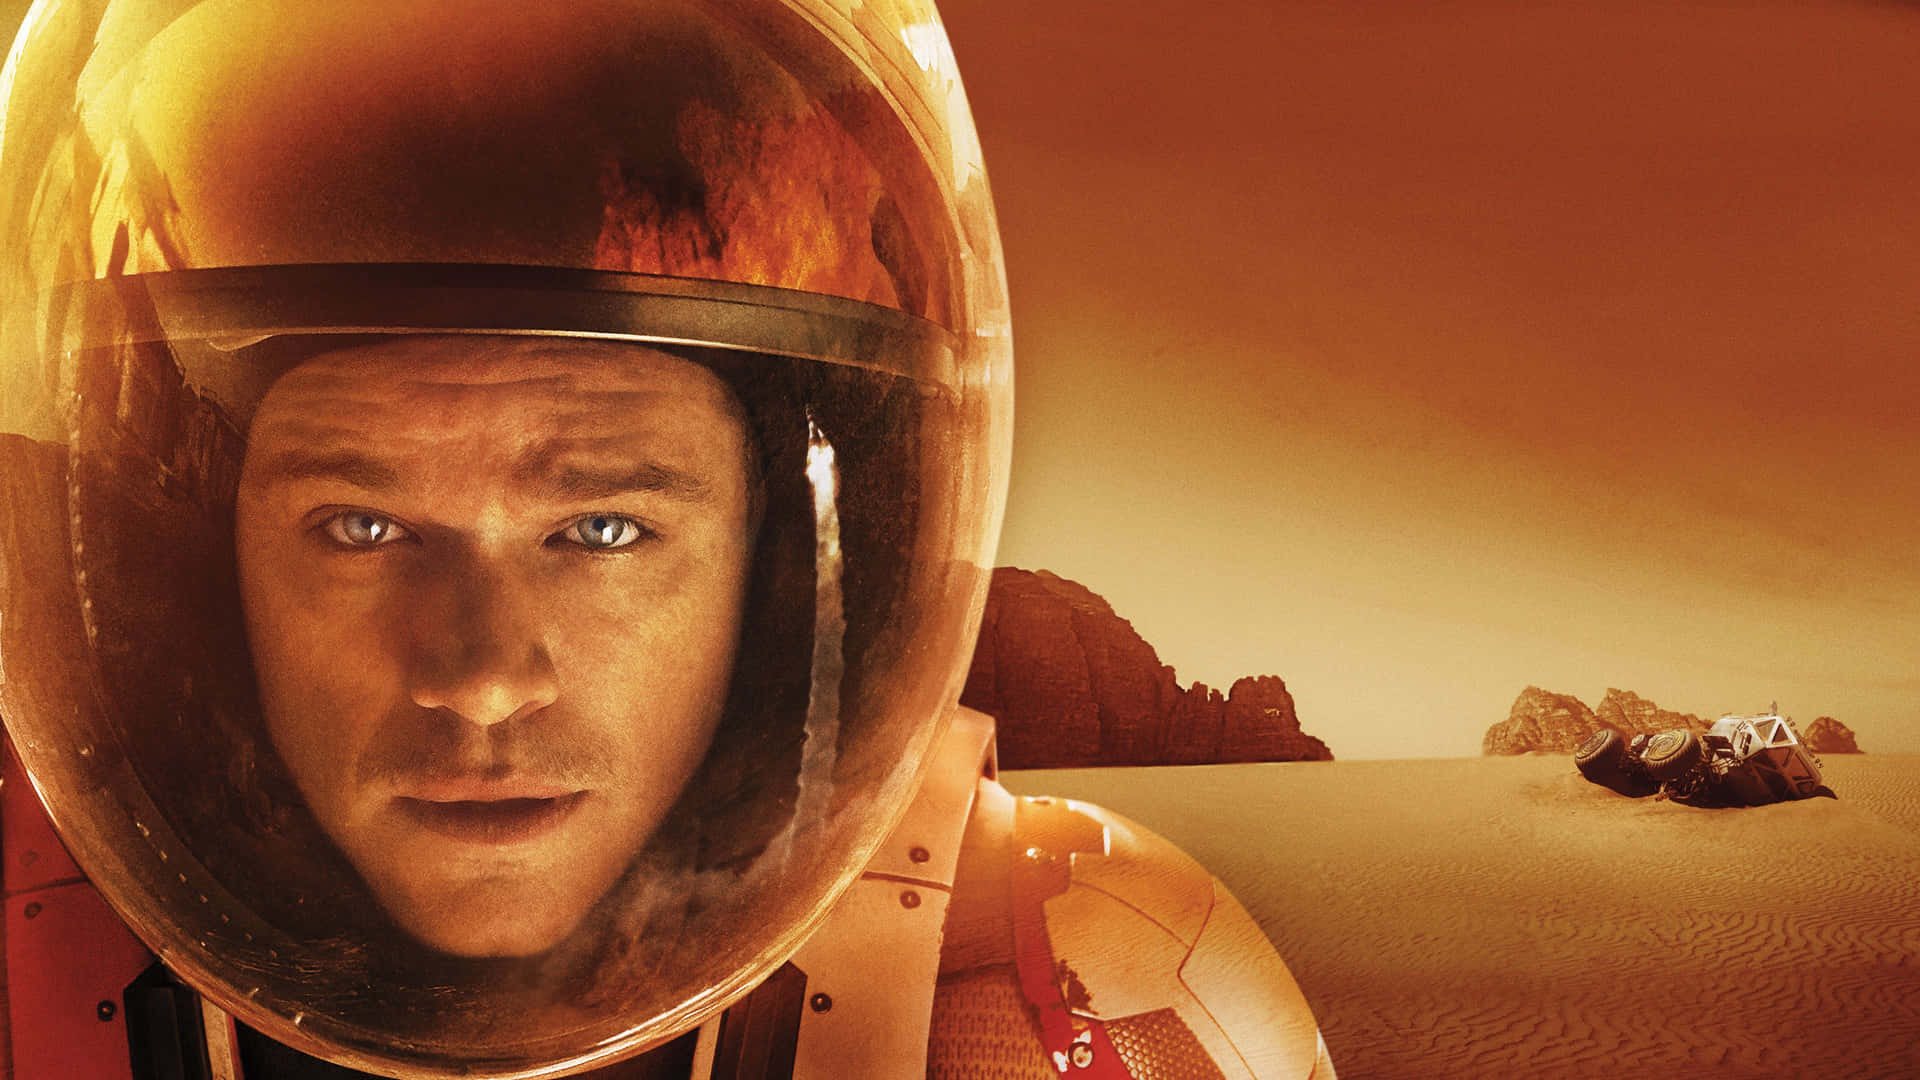 Astronaut Mark Watney Stranded On Mars In The Martian Background